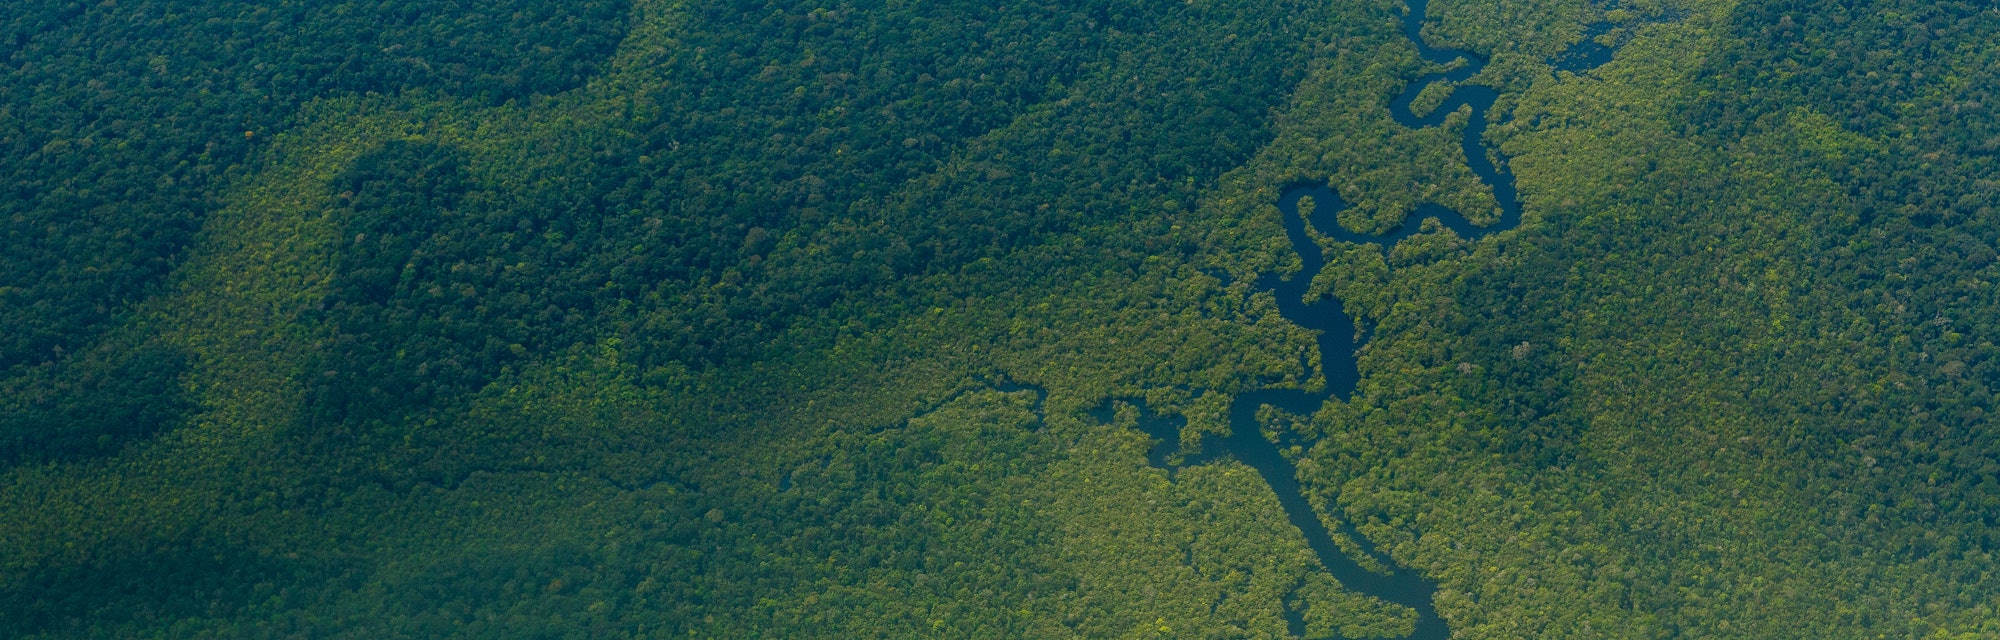 Scientists Made A Counterintuitive Discovery About The Amazon Rainforest